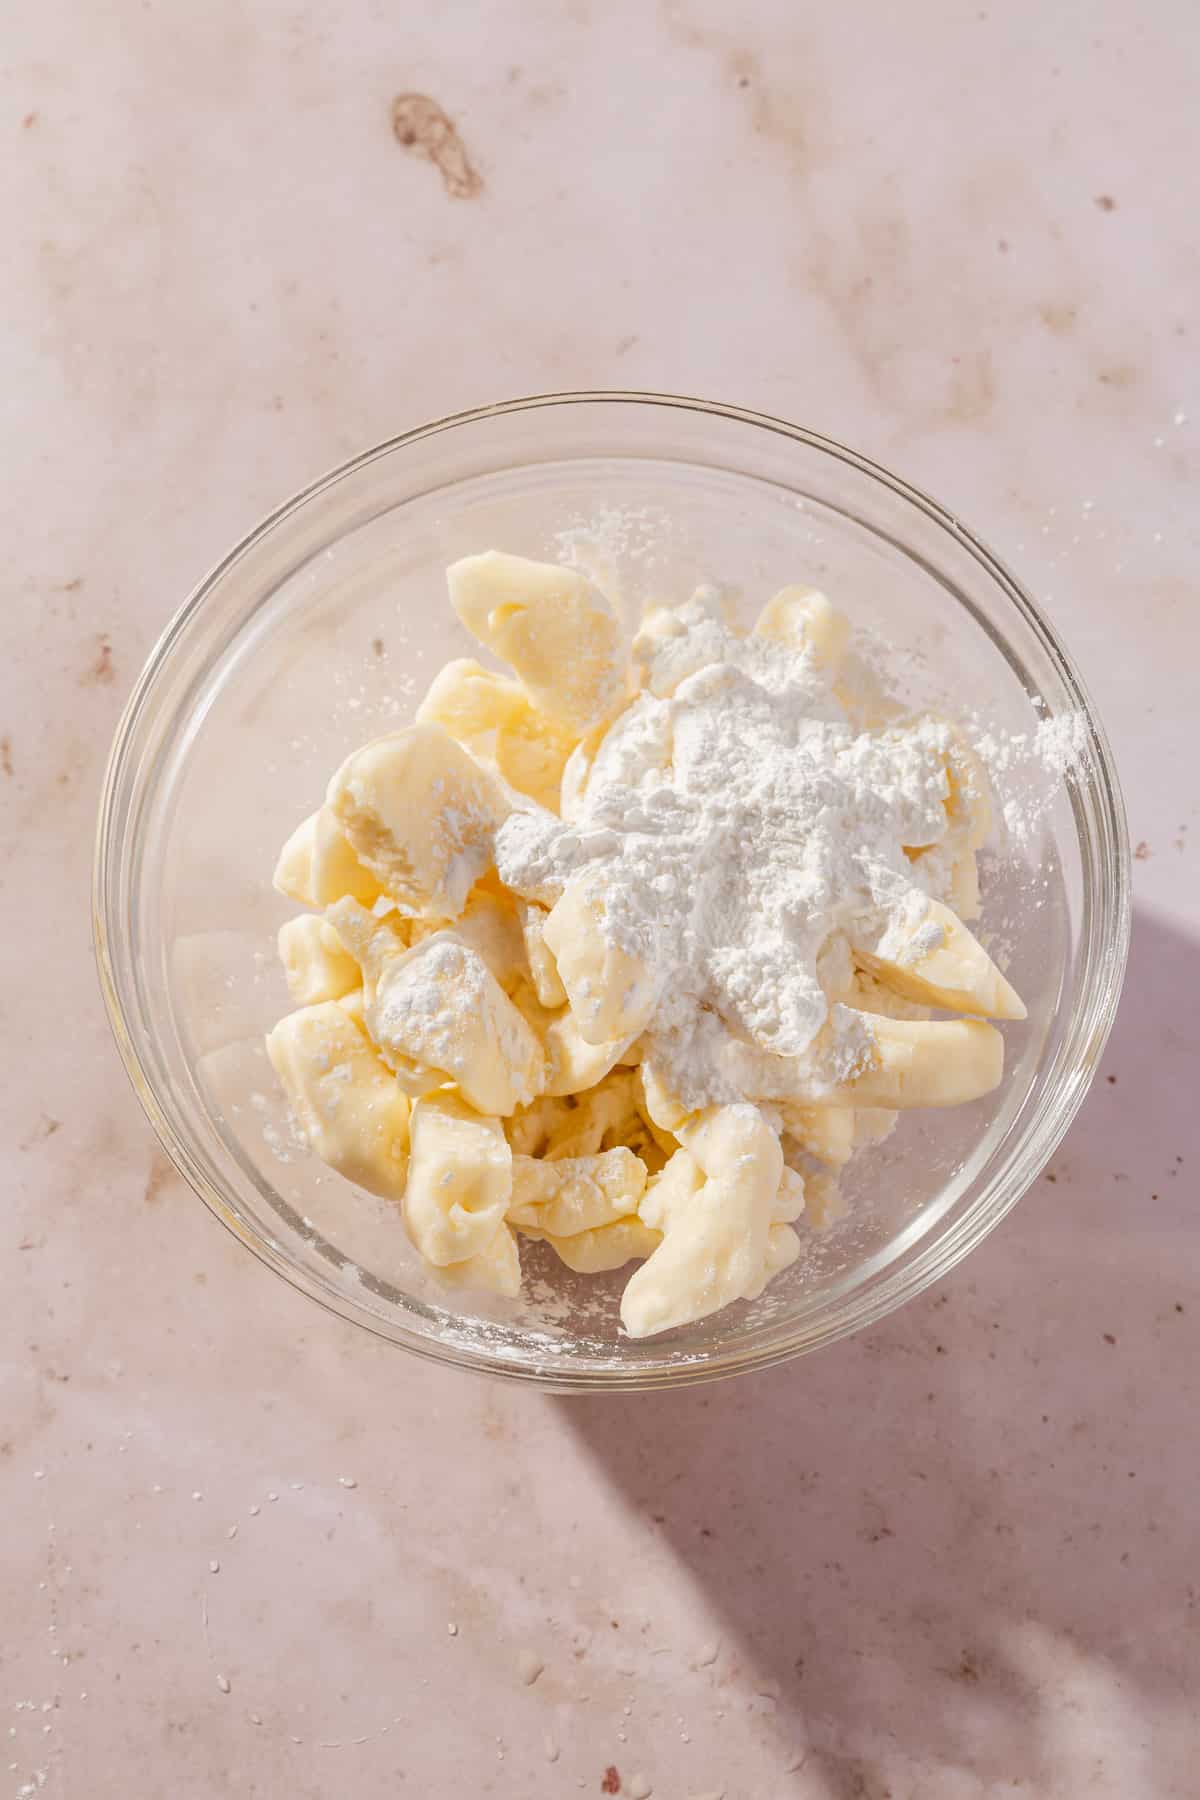 A glass mixing bowl with a pile of white cheddar cheese curds topped with cornstarch before tossing together.